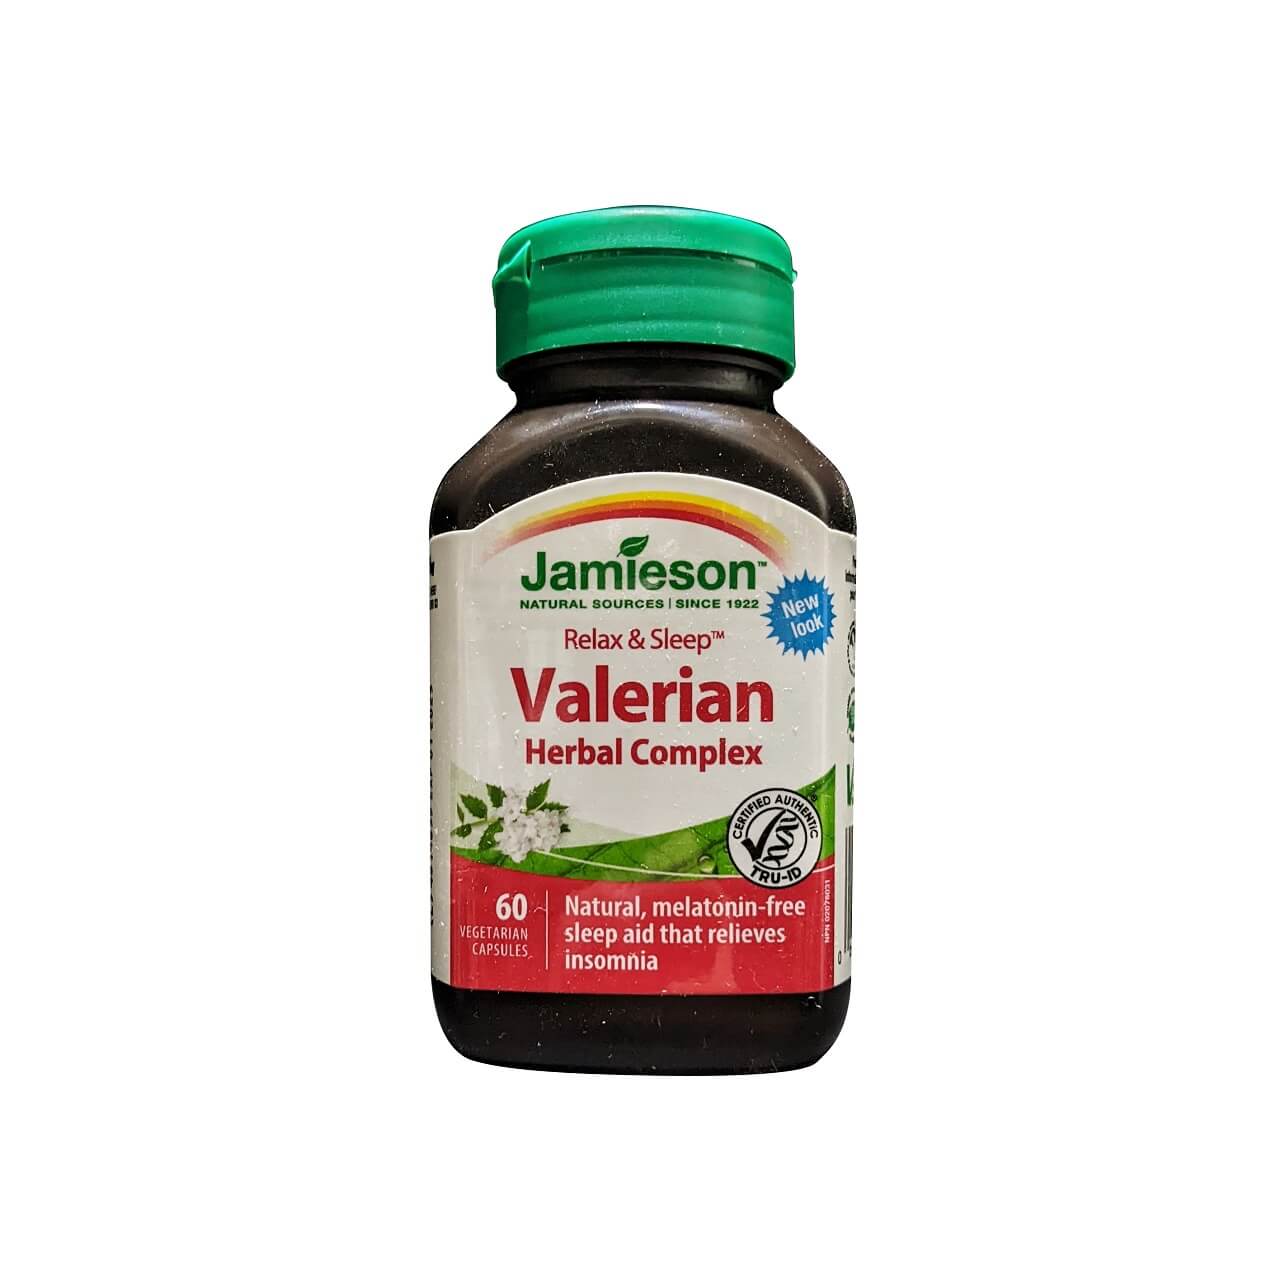 Product label for Jamieson Valerian Herbal Complex (60 capsules) in English